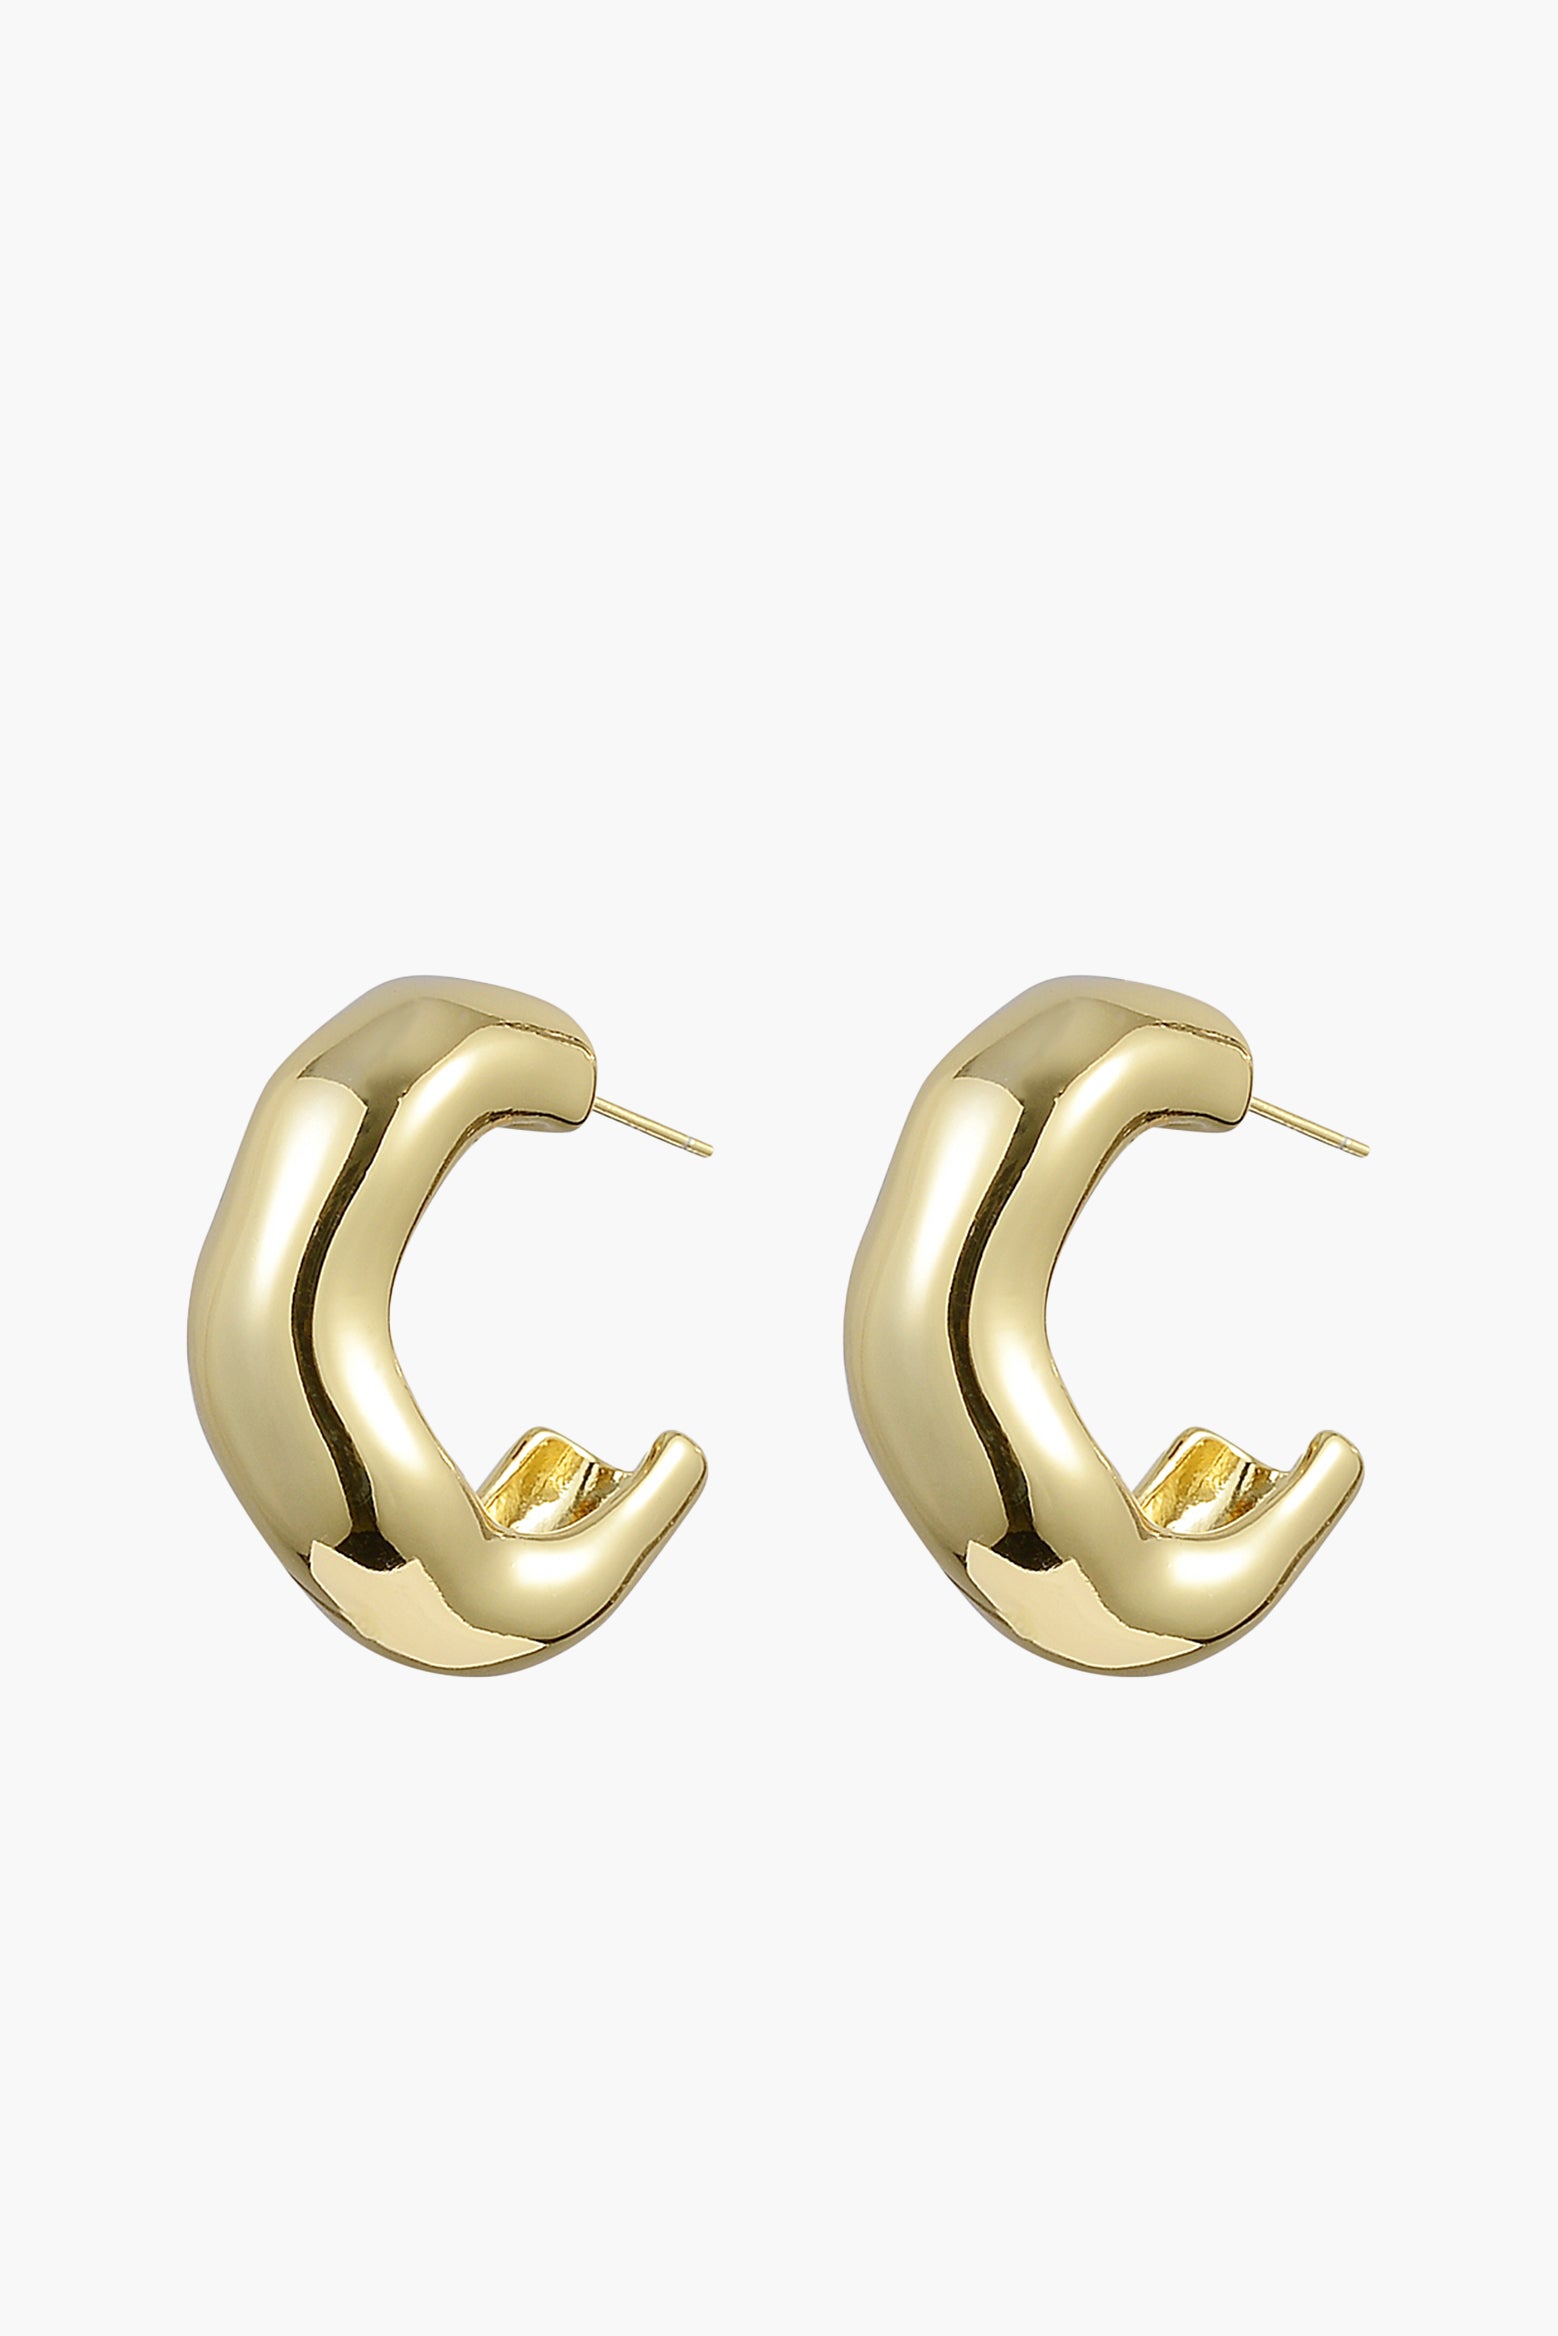 Anna Rossi Chunky Wave Hoop in Gold available at The New Trend Australia.